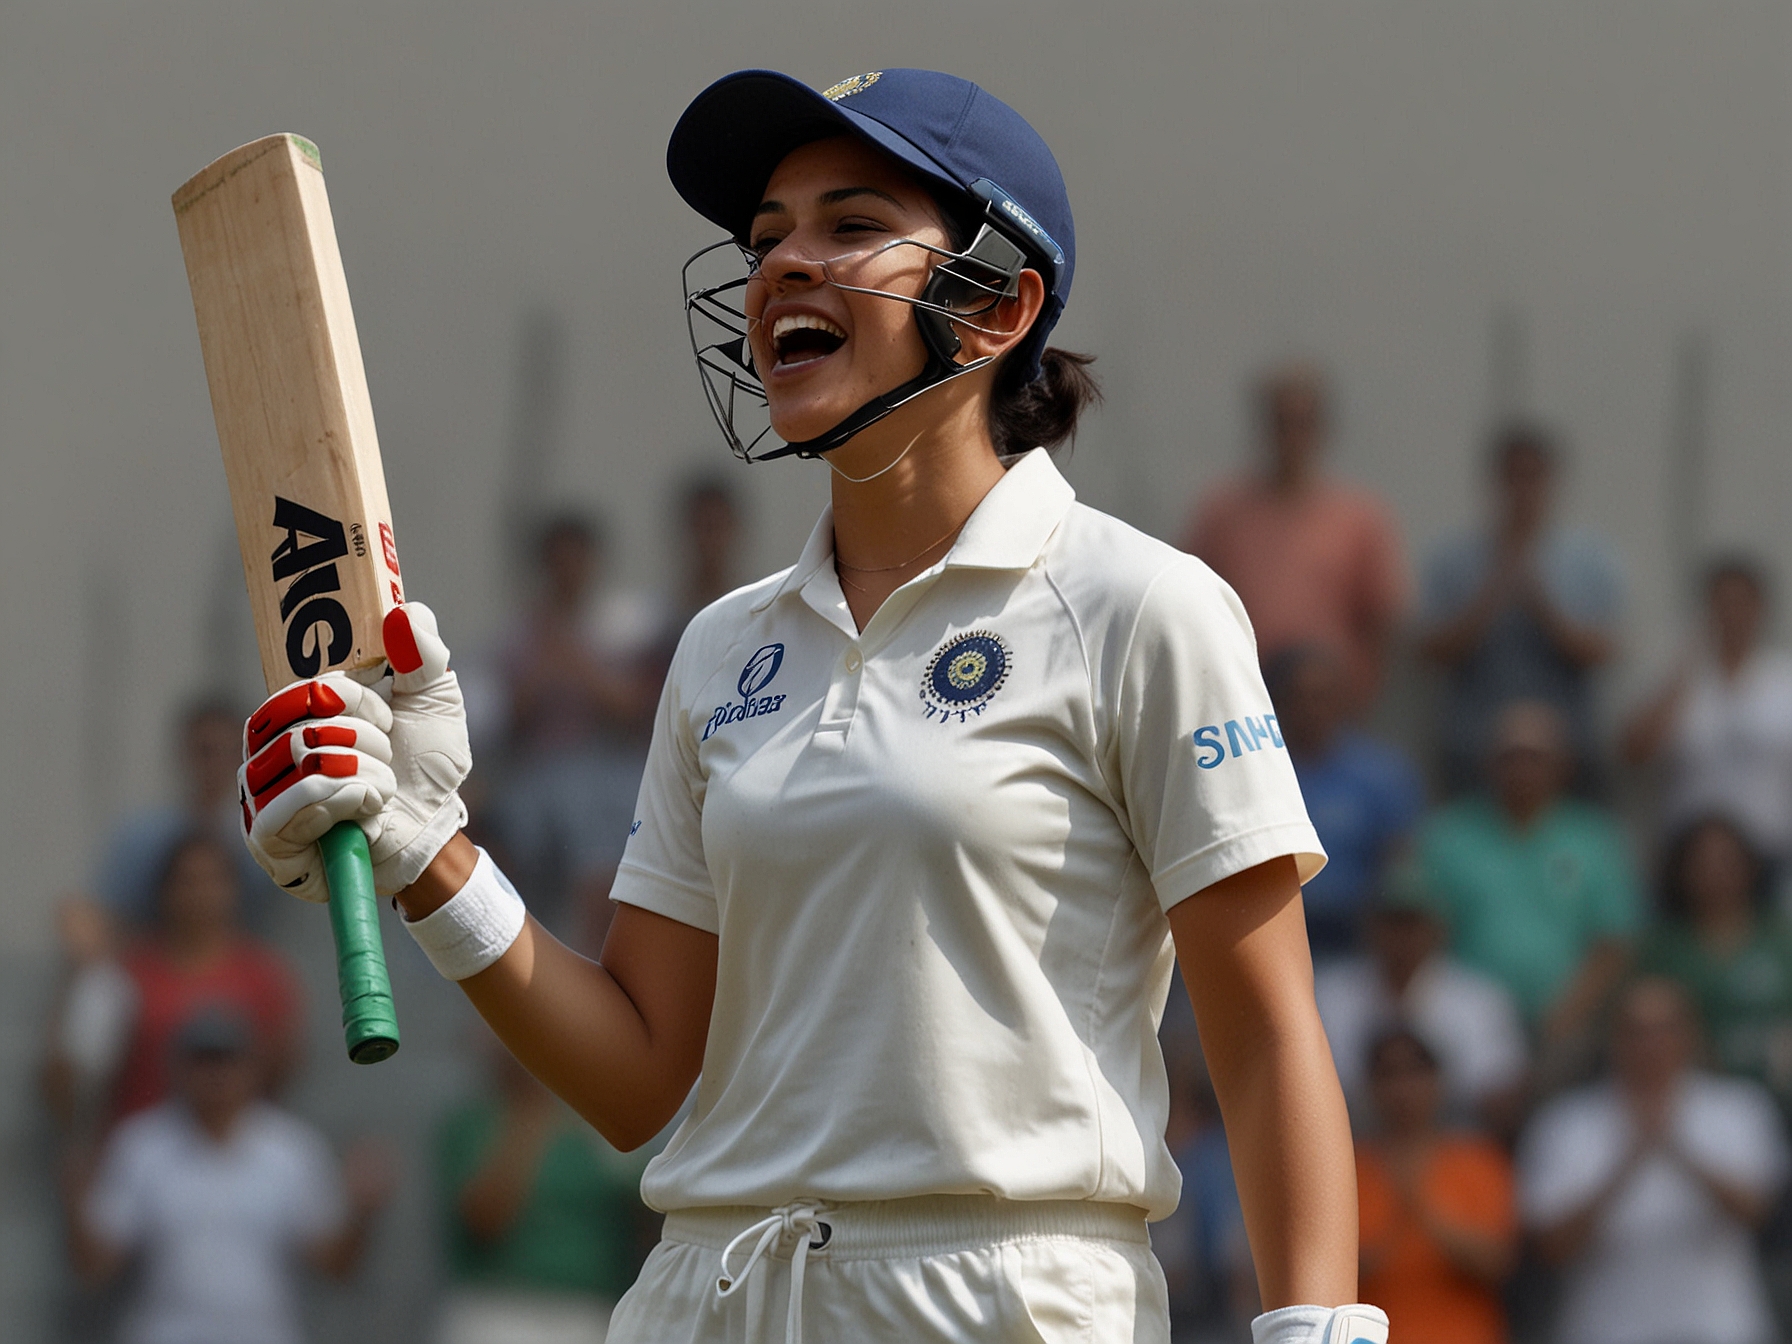 Smriti Mandhana acknowledges the crowd after scoring a quick-fire century, partnering with Shafali Verma to help India reach a commanding total against South Africa on day 1 of the test match.